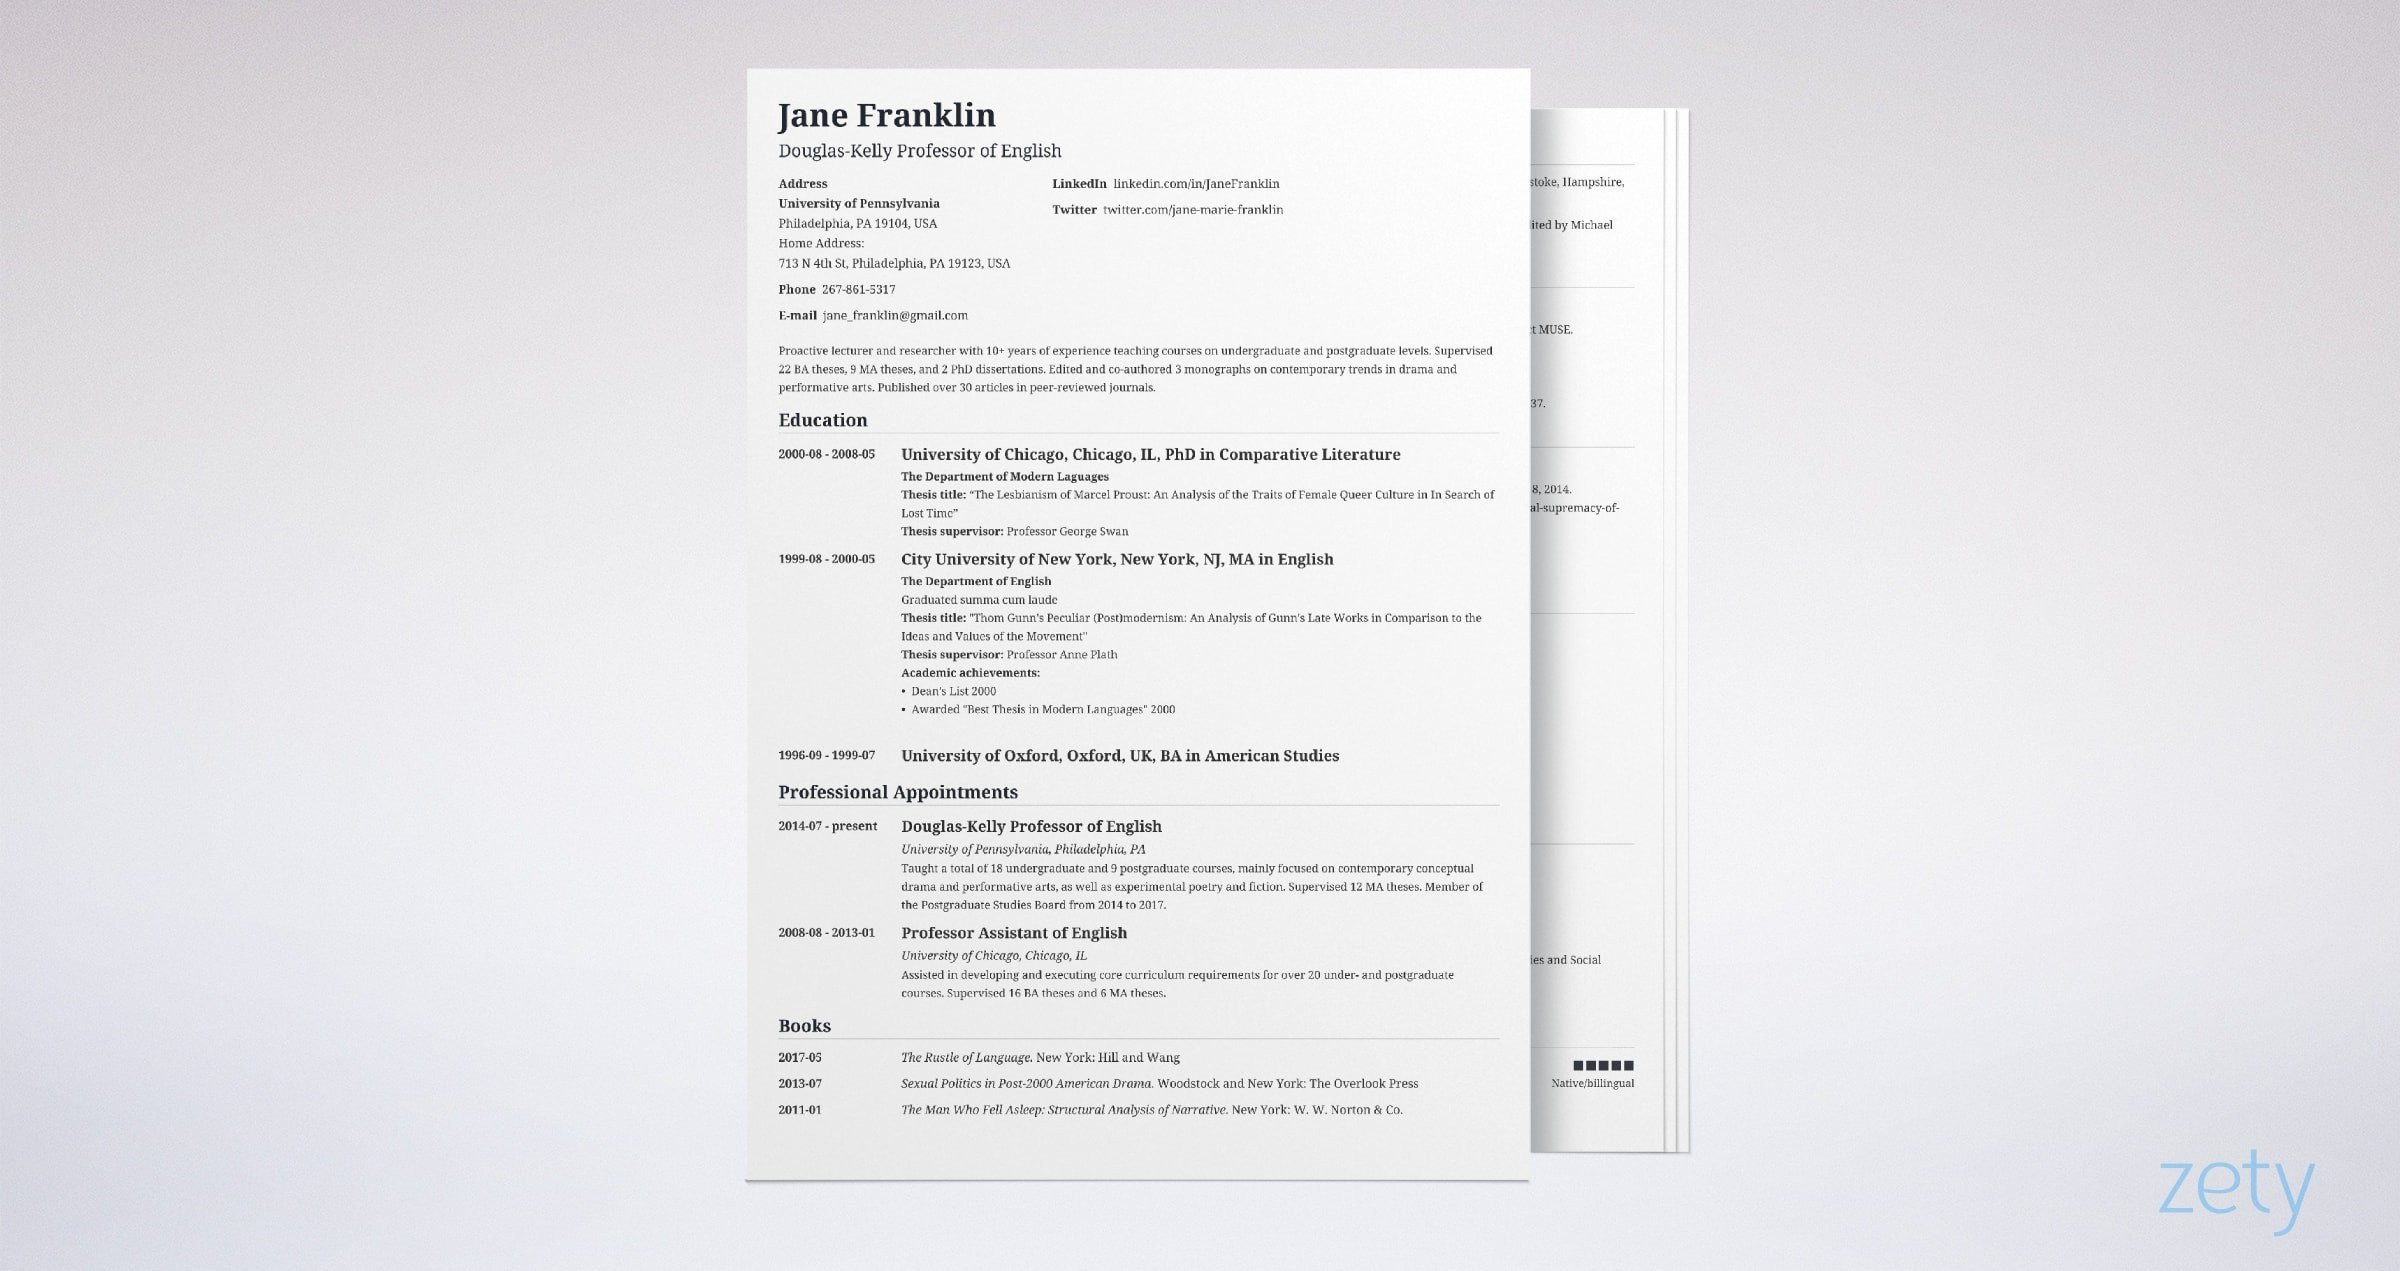 Sample Resume for College Instructor Position Academic (cv) Curriculum Vitae: Template, Examples & Guide